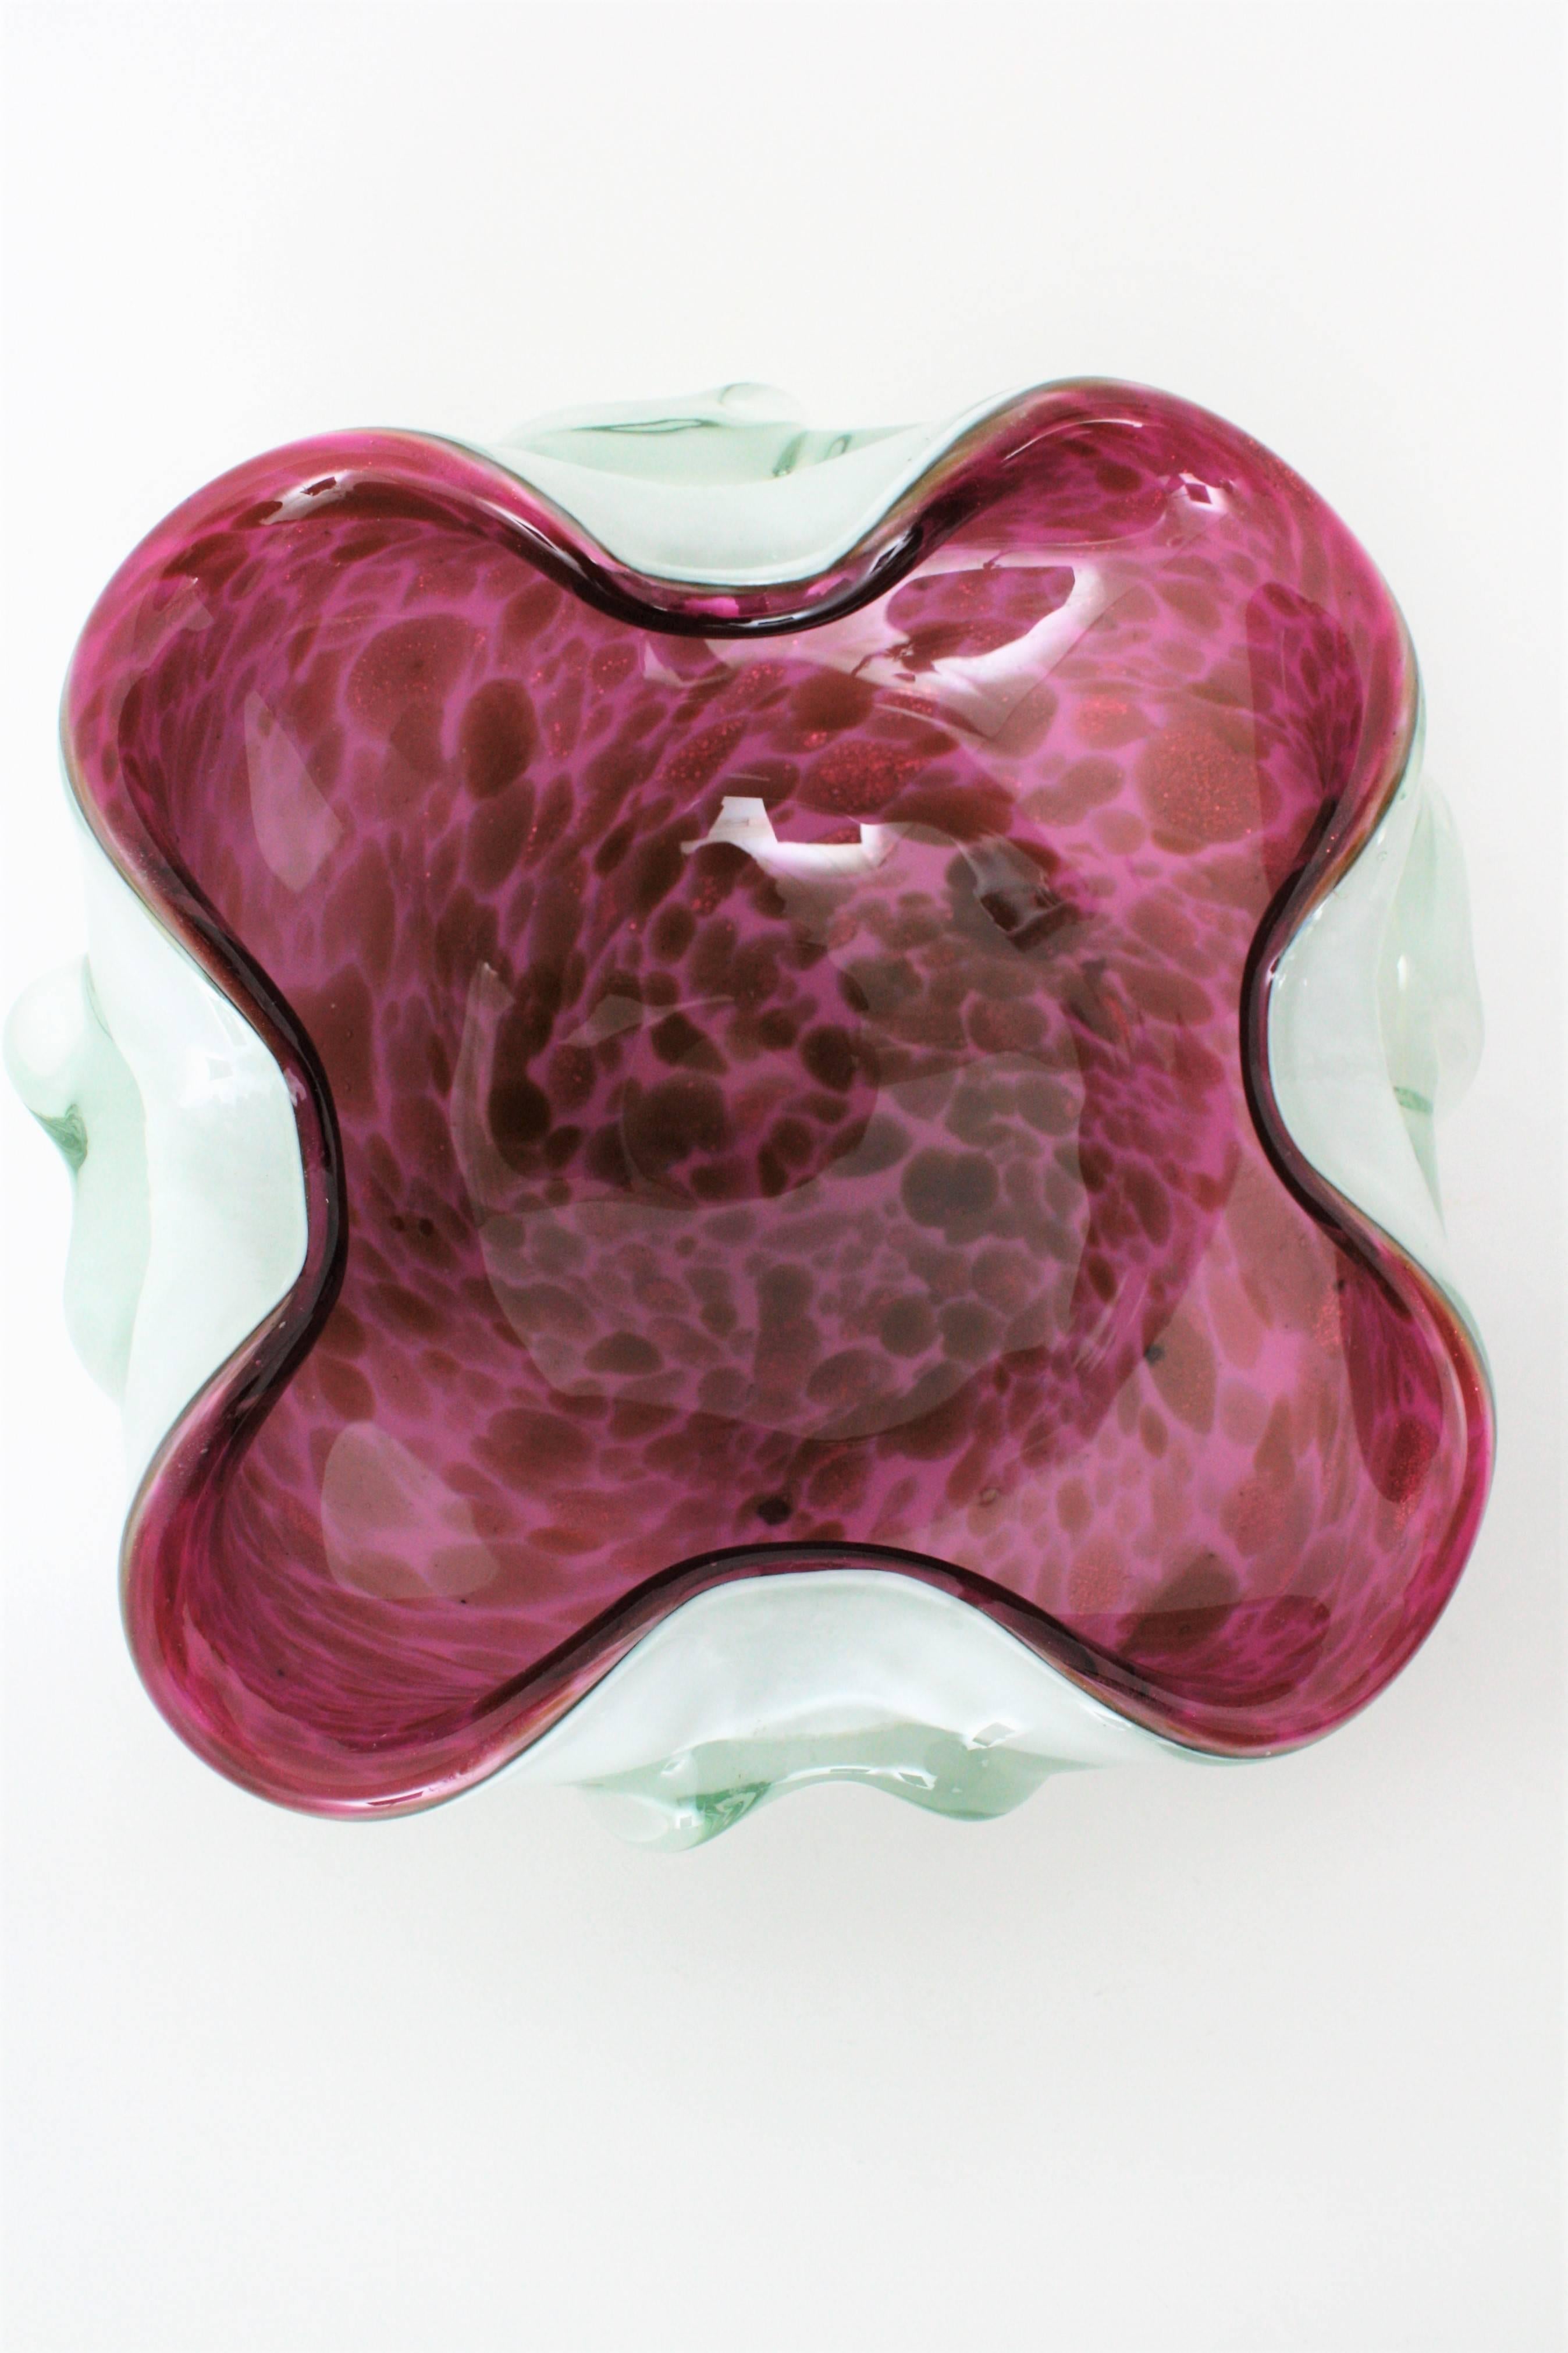 Hand-Crafted Fratelli Toso Murano Pink White Italian Art Glass Bowl, 1950s For Sale